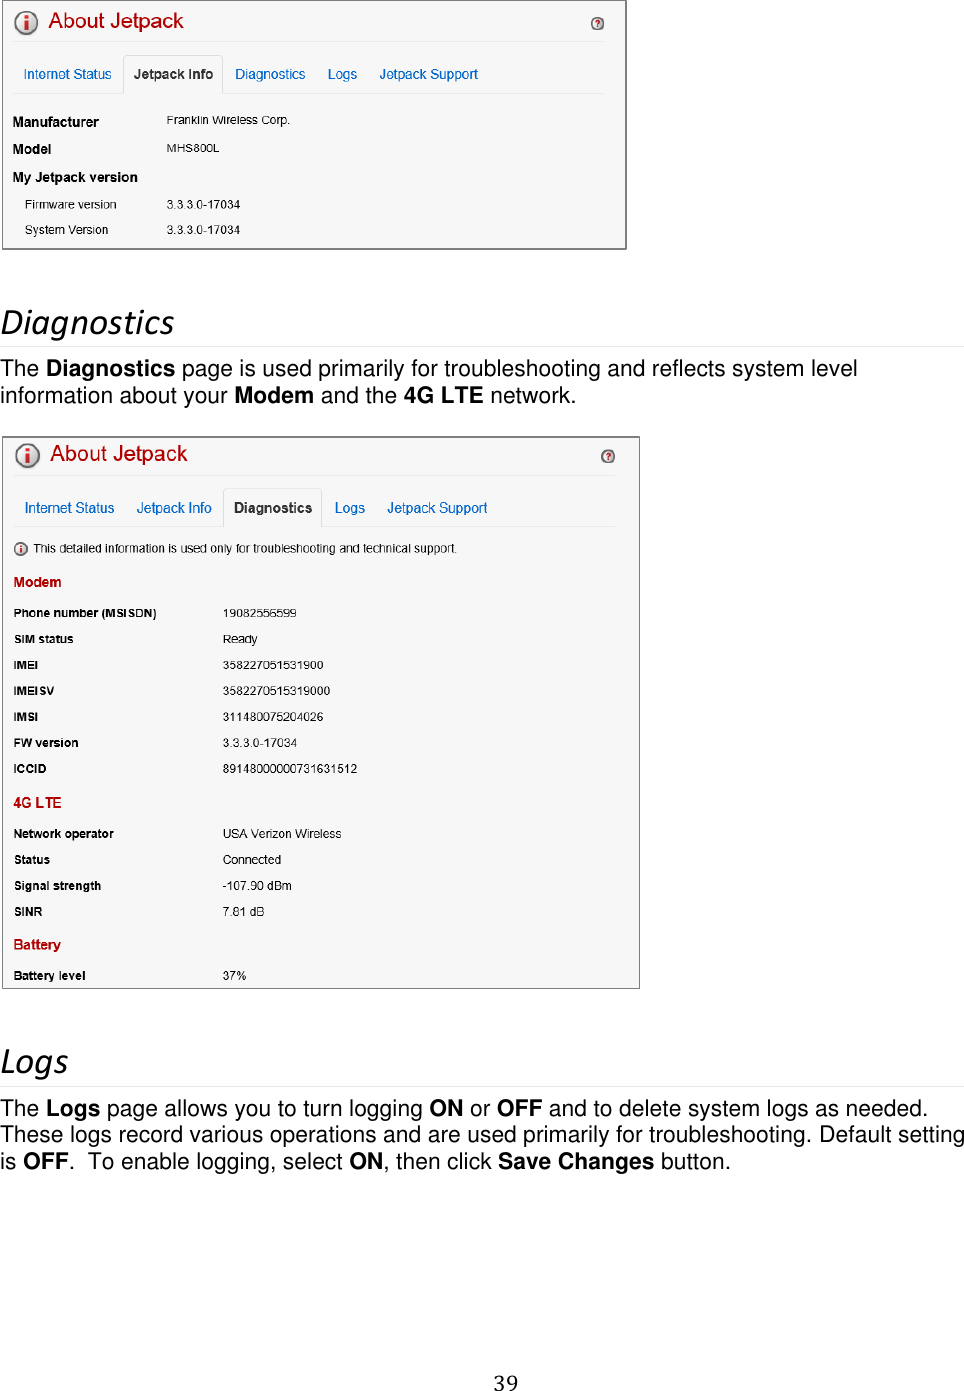   39    Diagnostics The Diagnostics page is used primarily for troubleshooting and reflects system level information about your Modem and the 4G LTE network.    Logs The Logs page allows you to turn logging ON or OFF and to delete system logs as needed. These logs record various operations and are used primarily for troubleshooting. Default setting is OFF.  To enable logging, select ON, then click Save Changes button.  